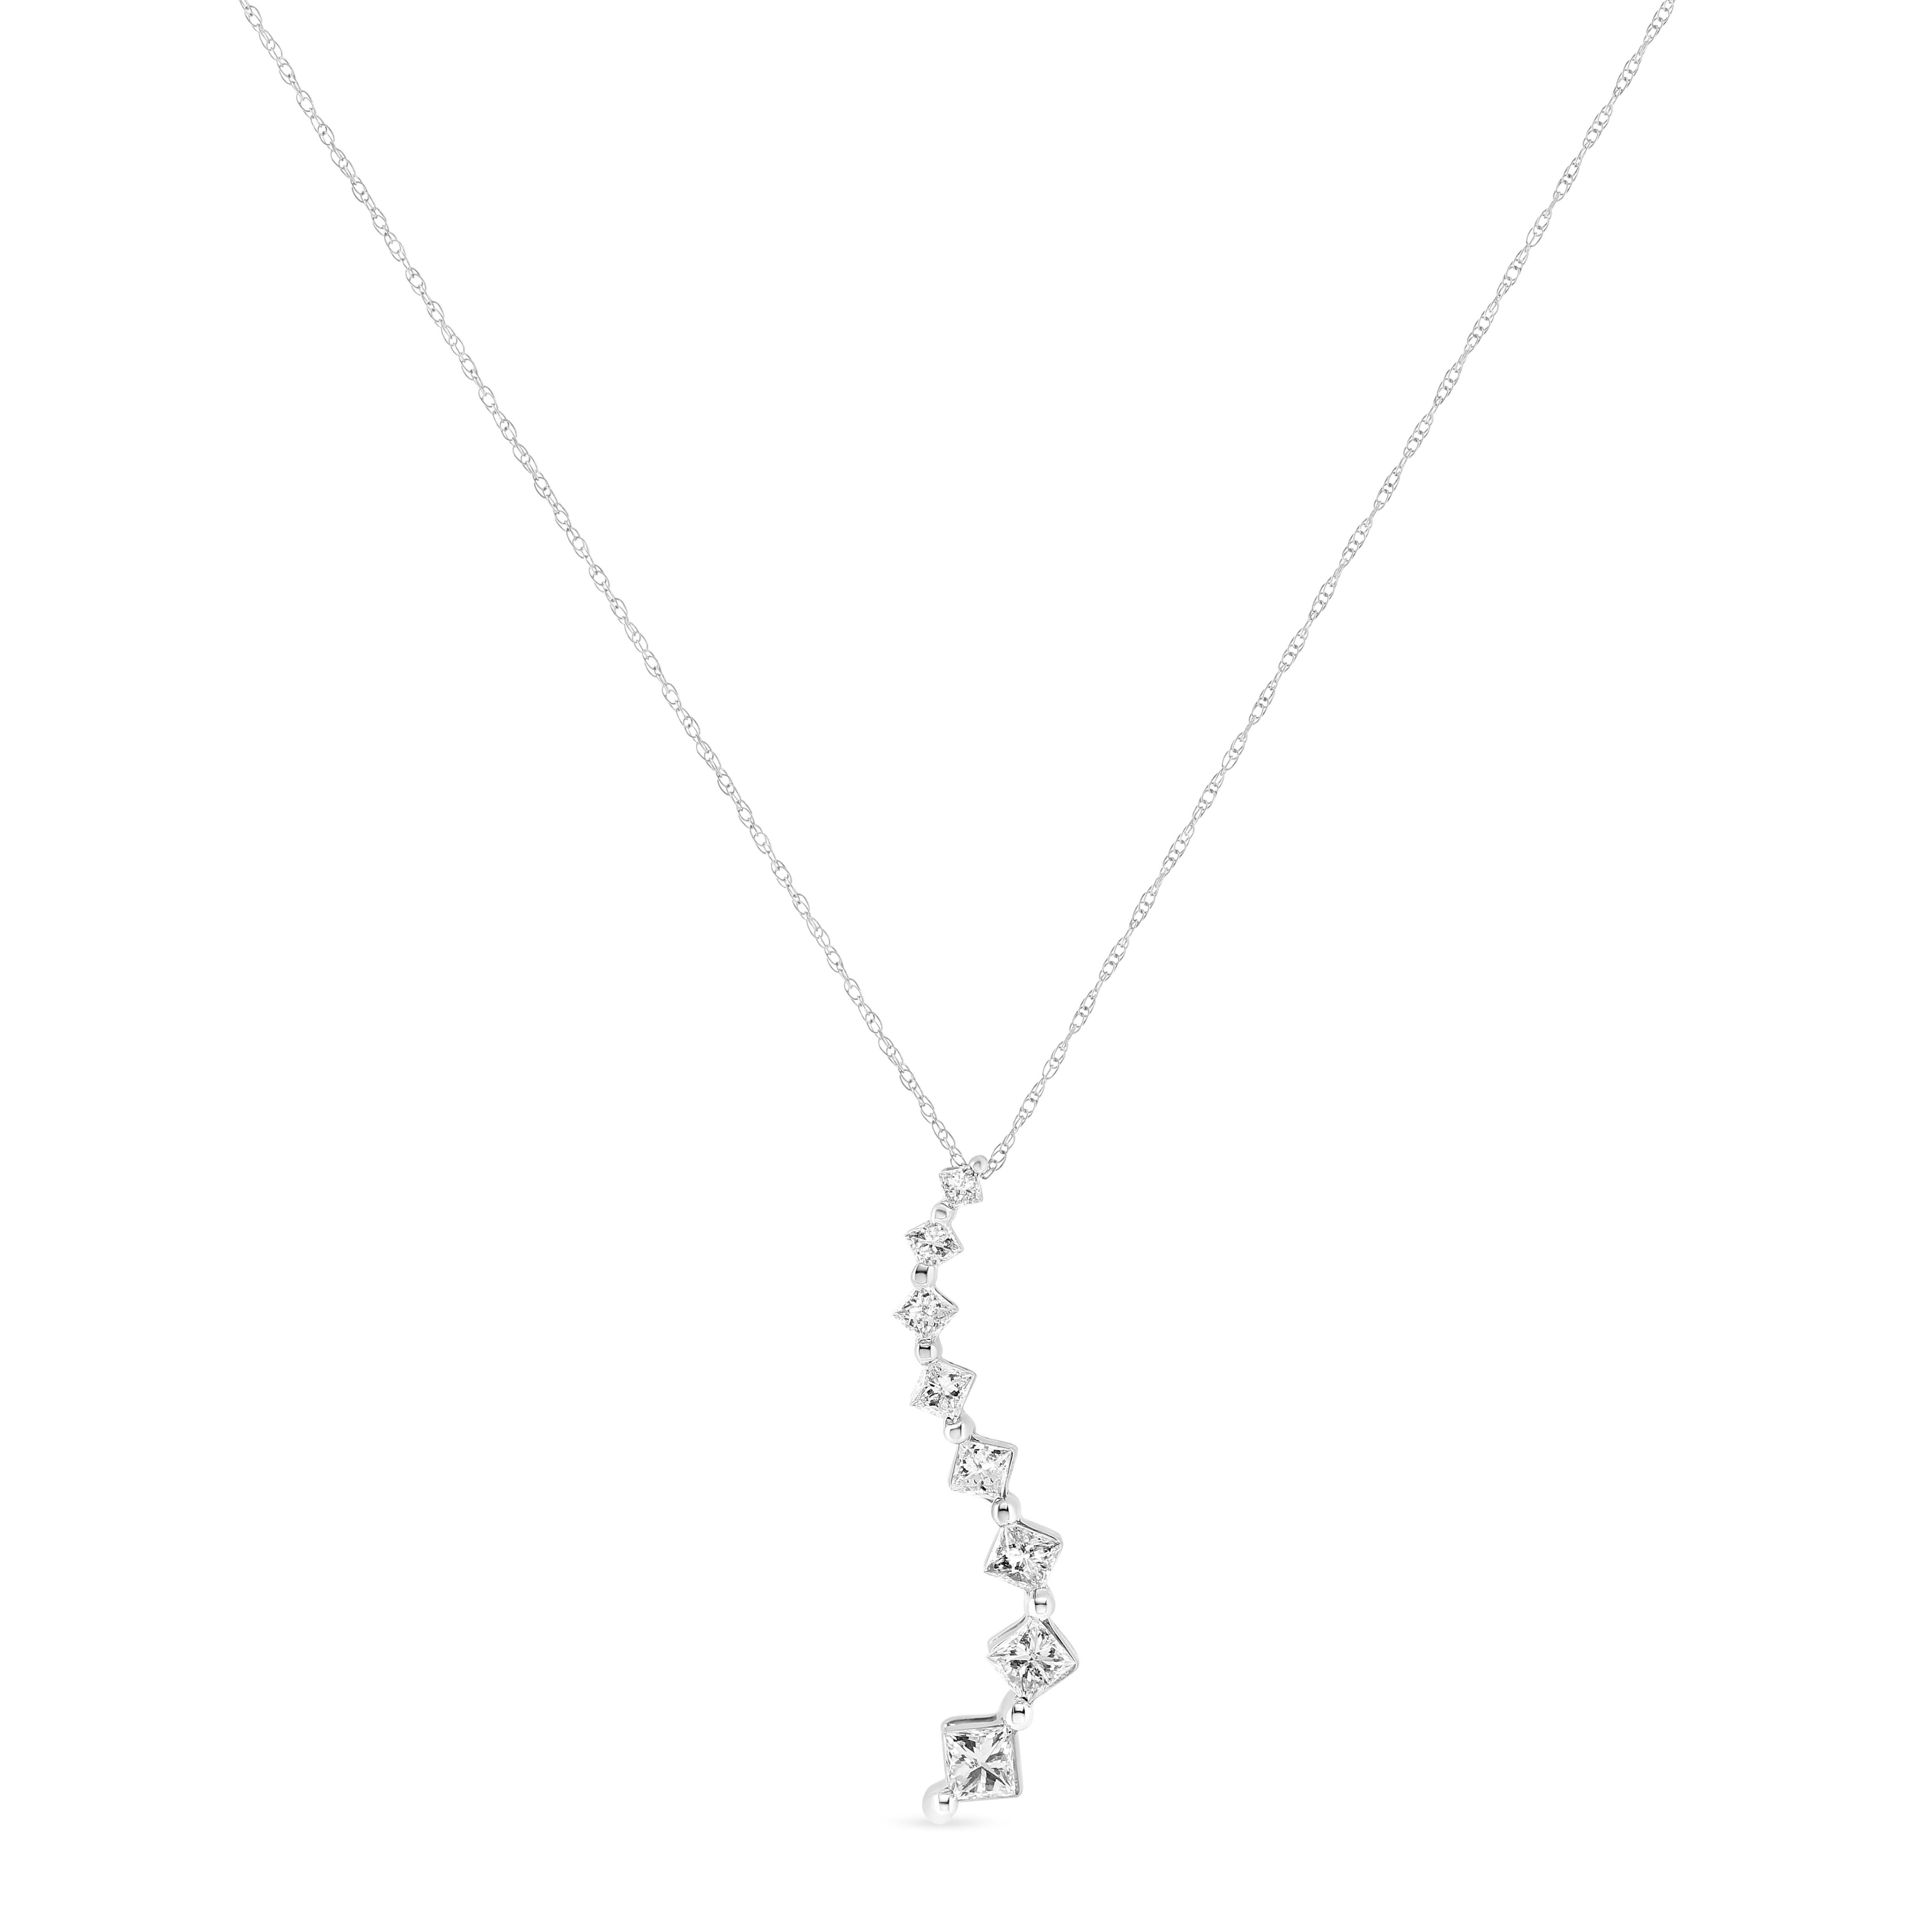 This exquisite journey pendant necklace is a statement piece you'll want to add to your jewelry collection. Made from cool weaves of 14k white gold, this design features 2.00 cttw of princess and baguette diamonds. Sparkling princess cut diamonds